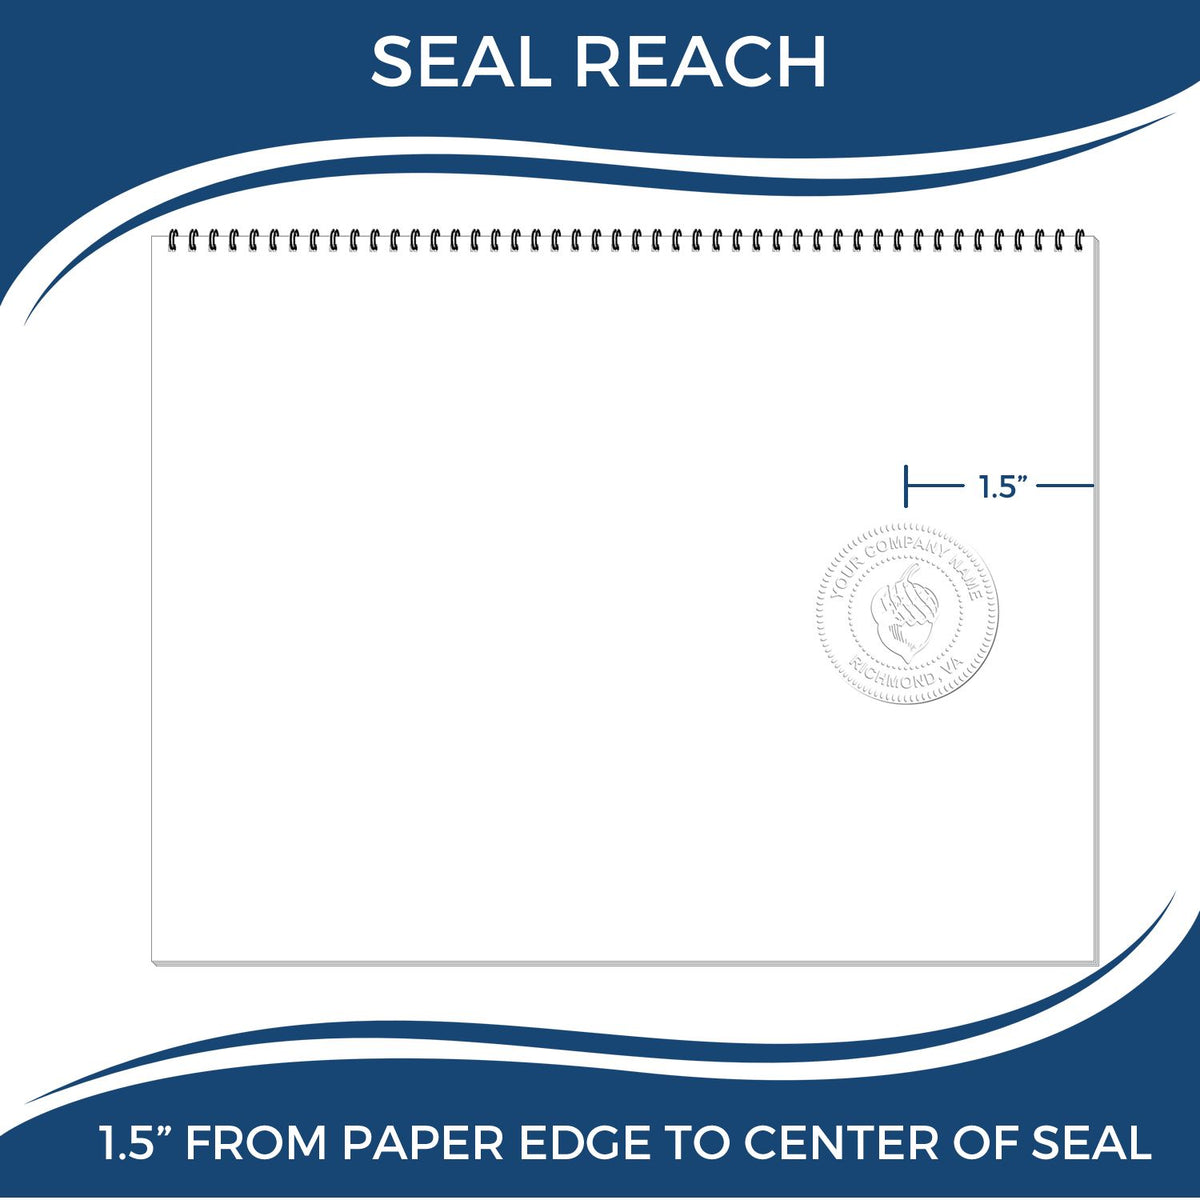 An infographic showing the seal reach which is represented by a ruler and a miniature seal image of the Hybrid New Hampshire Landscape Architect Seal